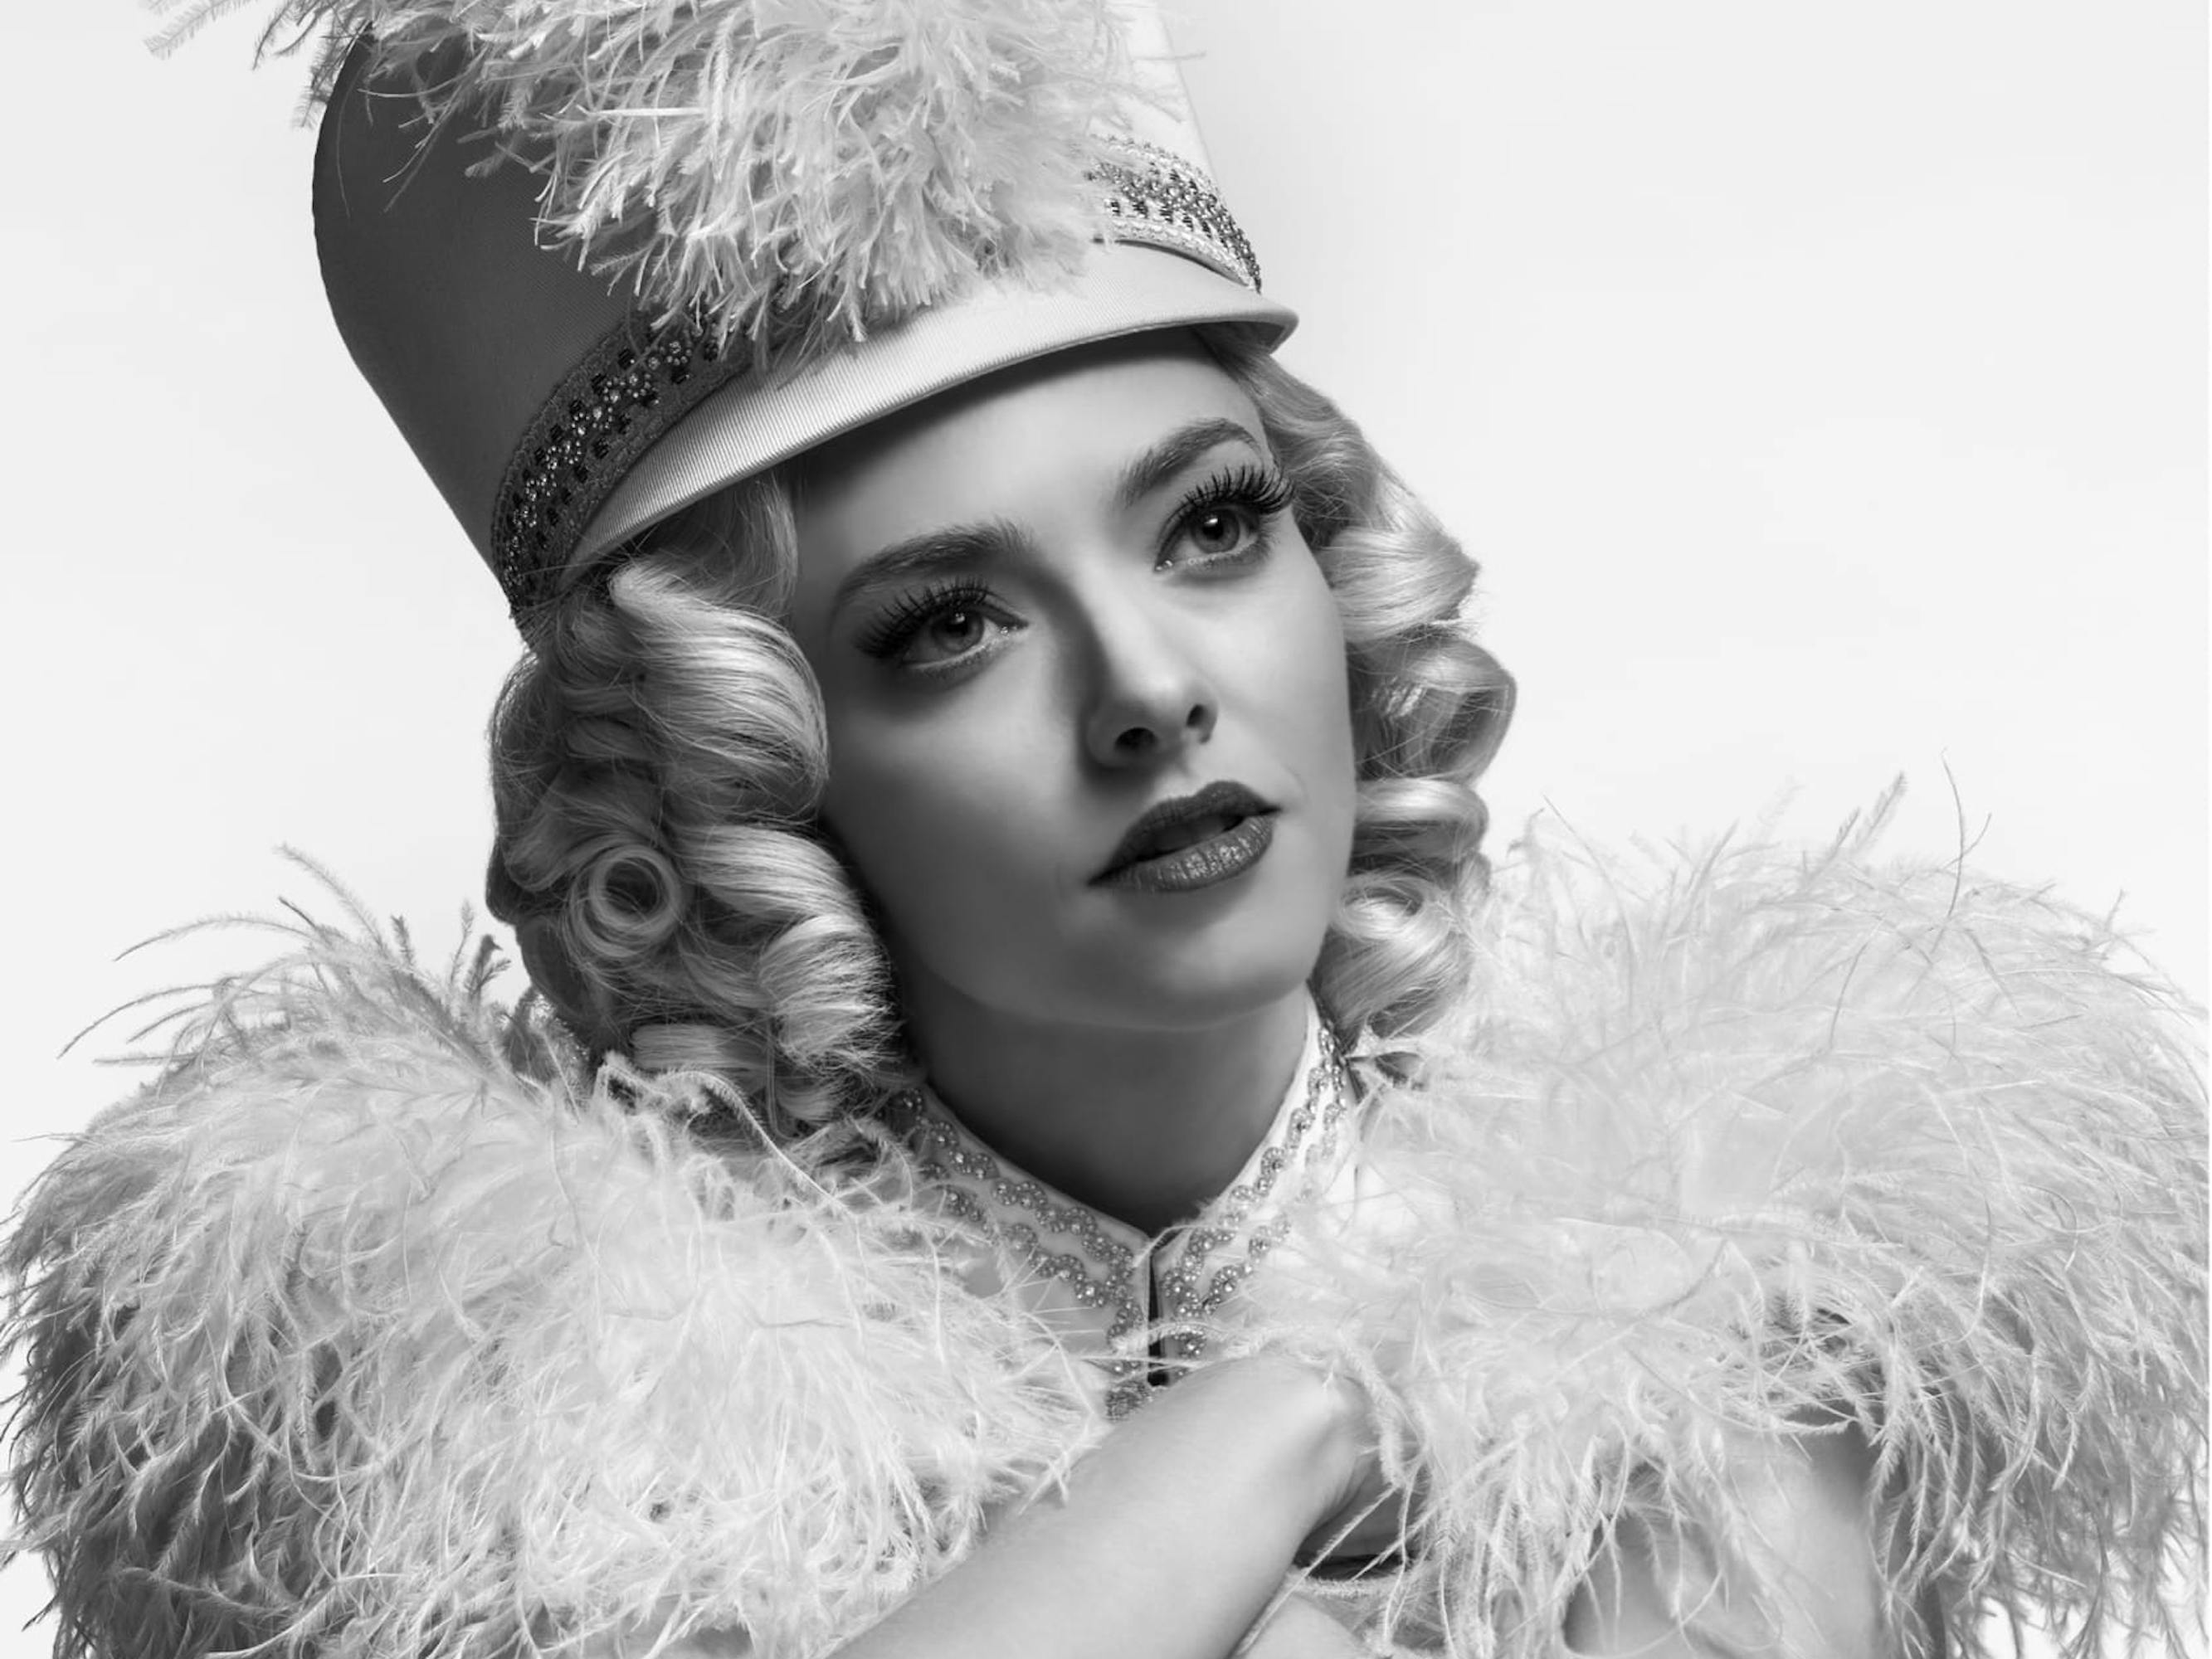 A portrait of Seyfried as Marion Davies. She’s pictured against a white background and lit in that soft Old Hollywood glow. Her blonde hair is in ringlets and she wears a cap with a prominent feather down the middle, plus matching white feathery epaulettes.